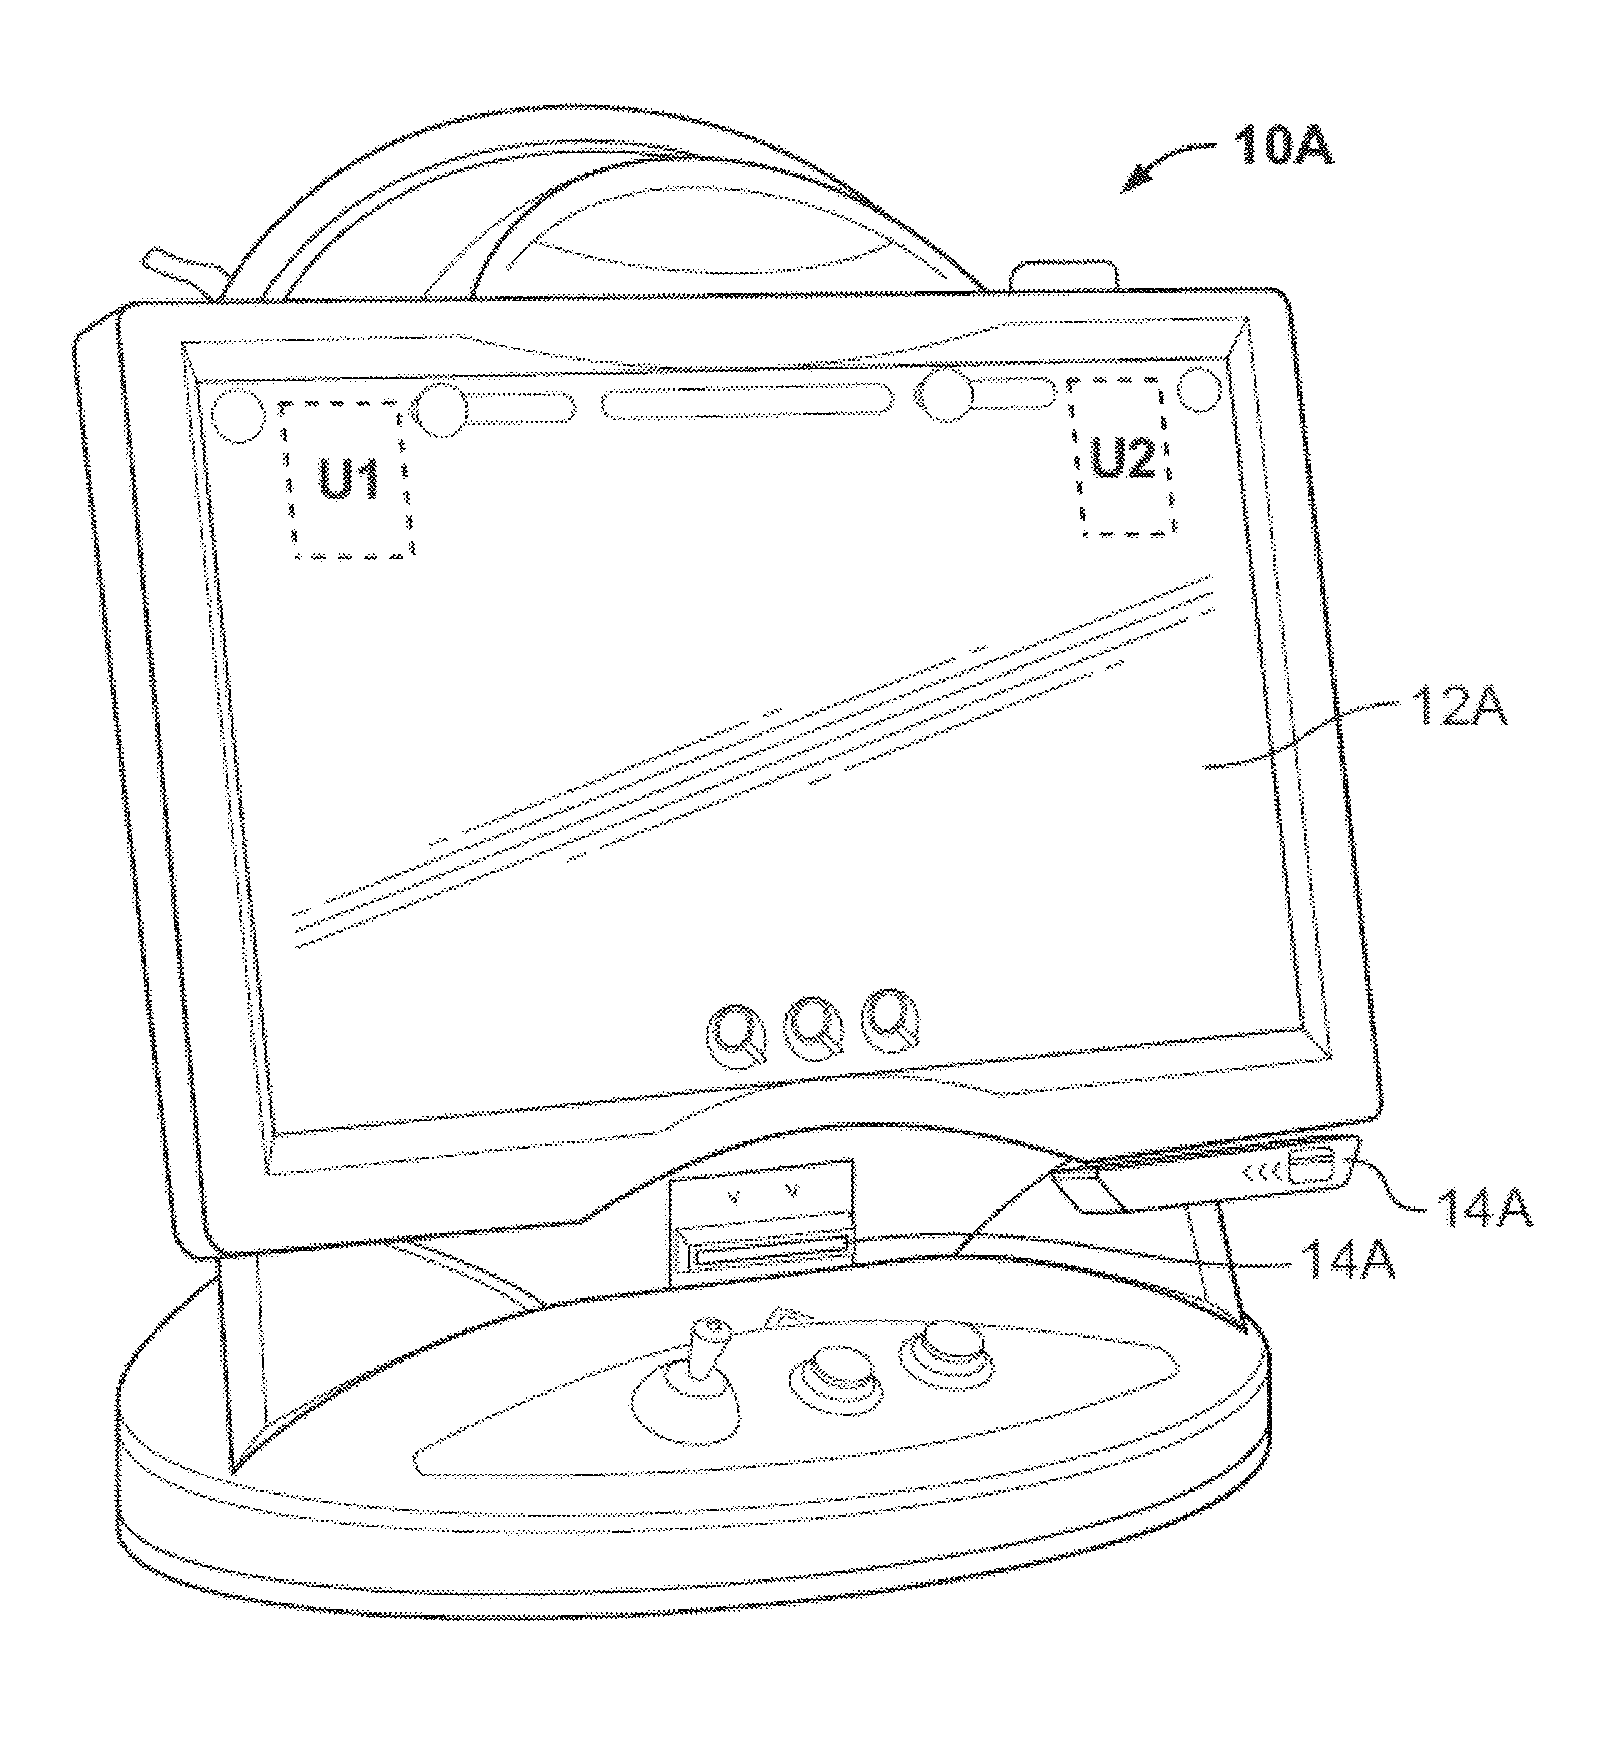 Electronic game tournament in an amusement device network